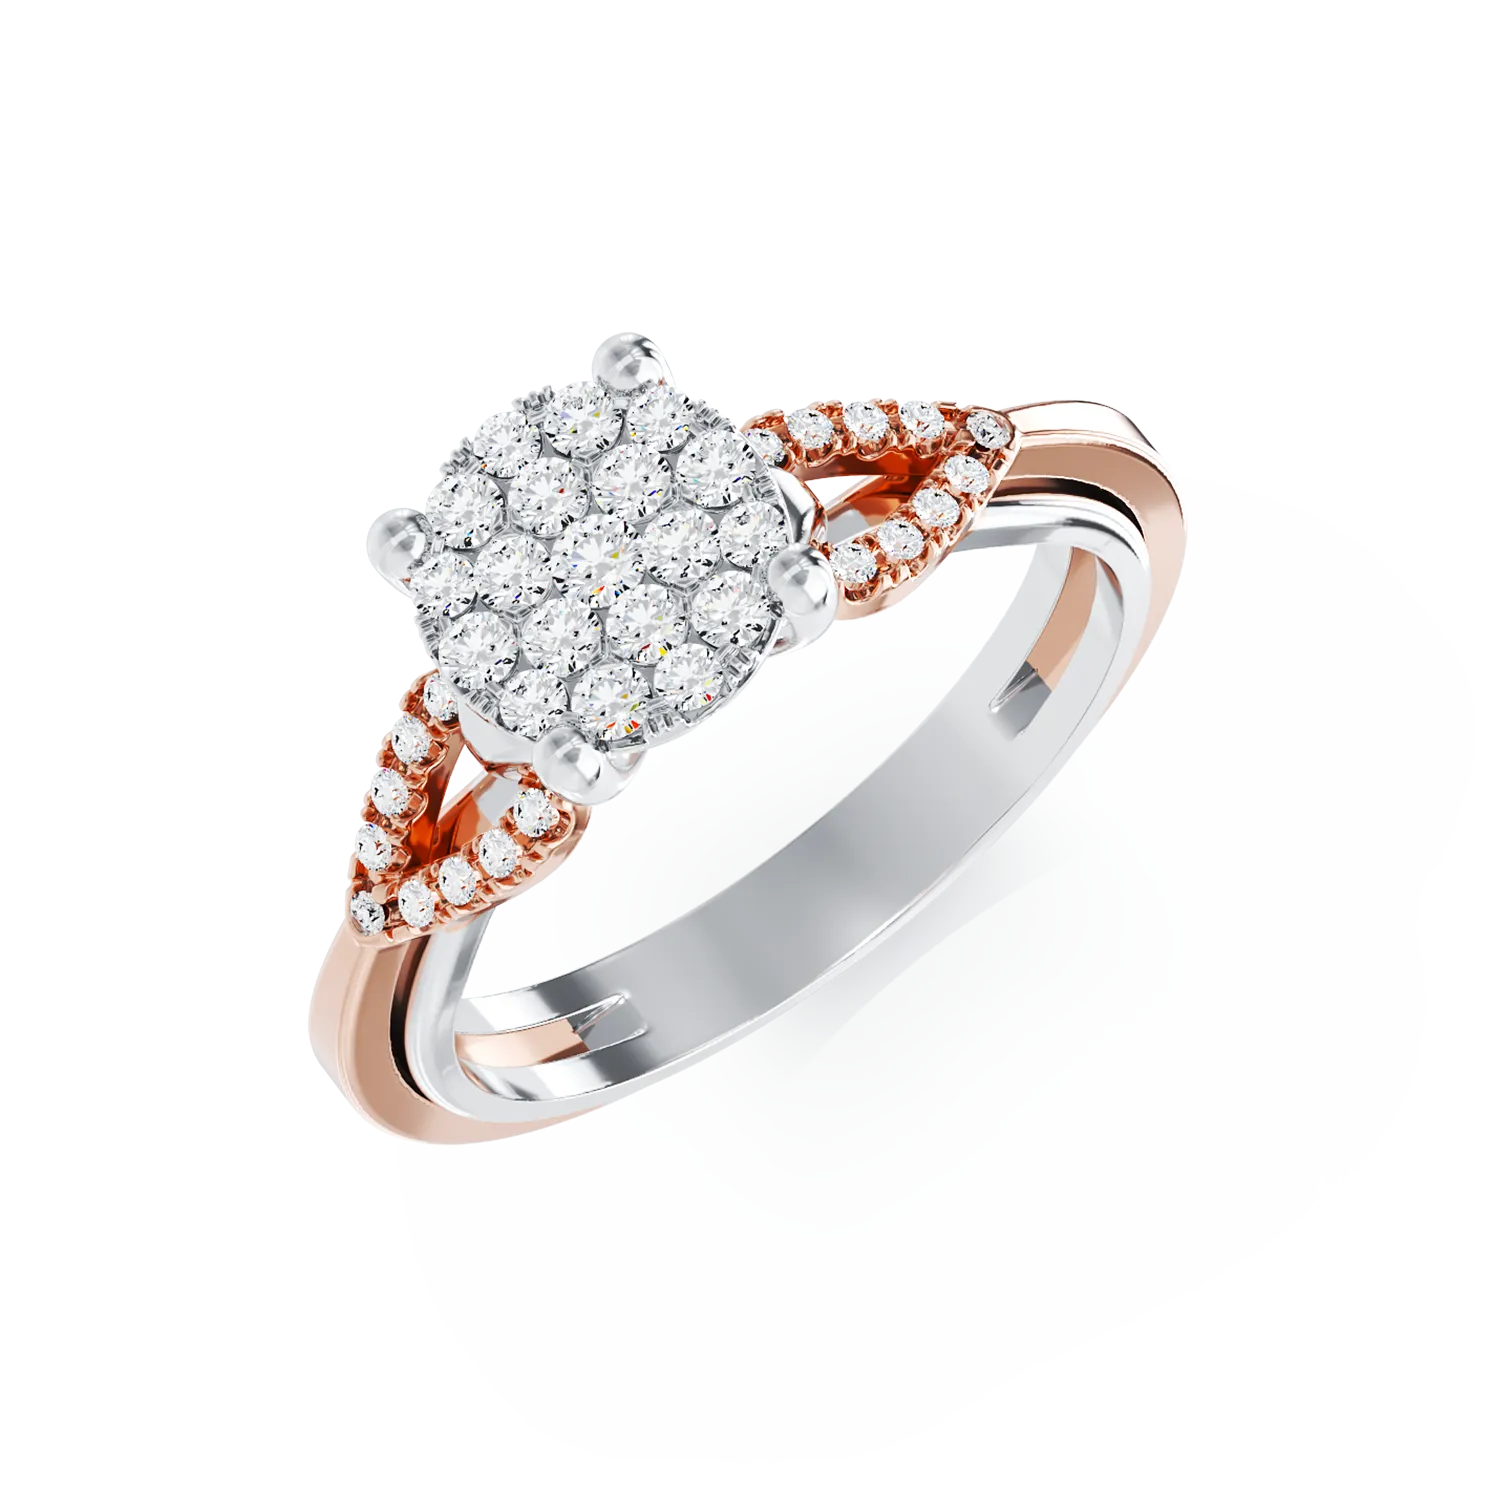 18K white-rose gold engagement ring with 0.35ct diamonds